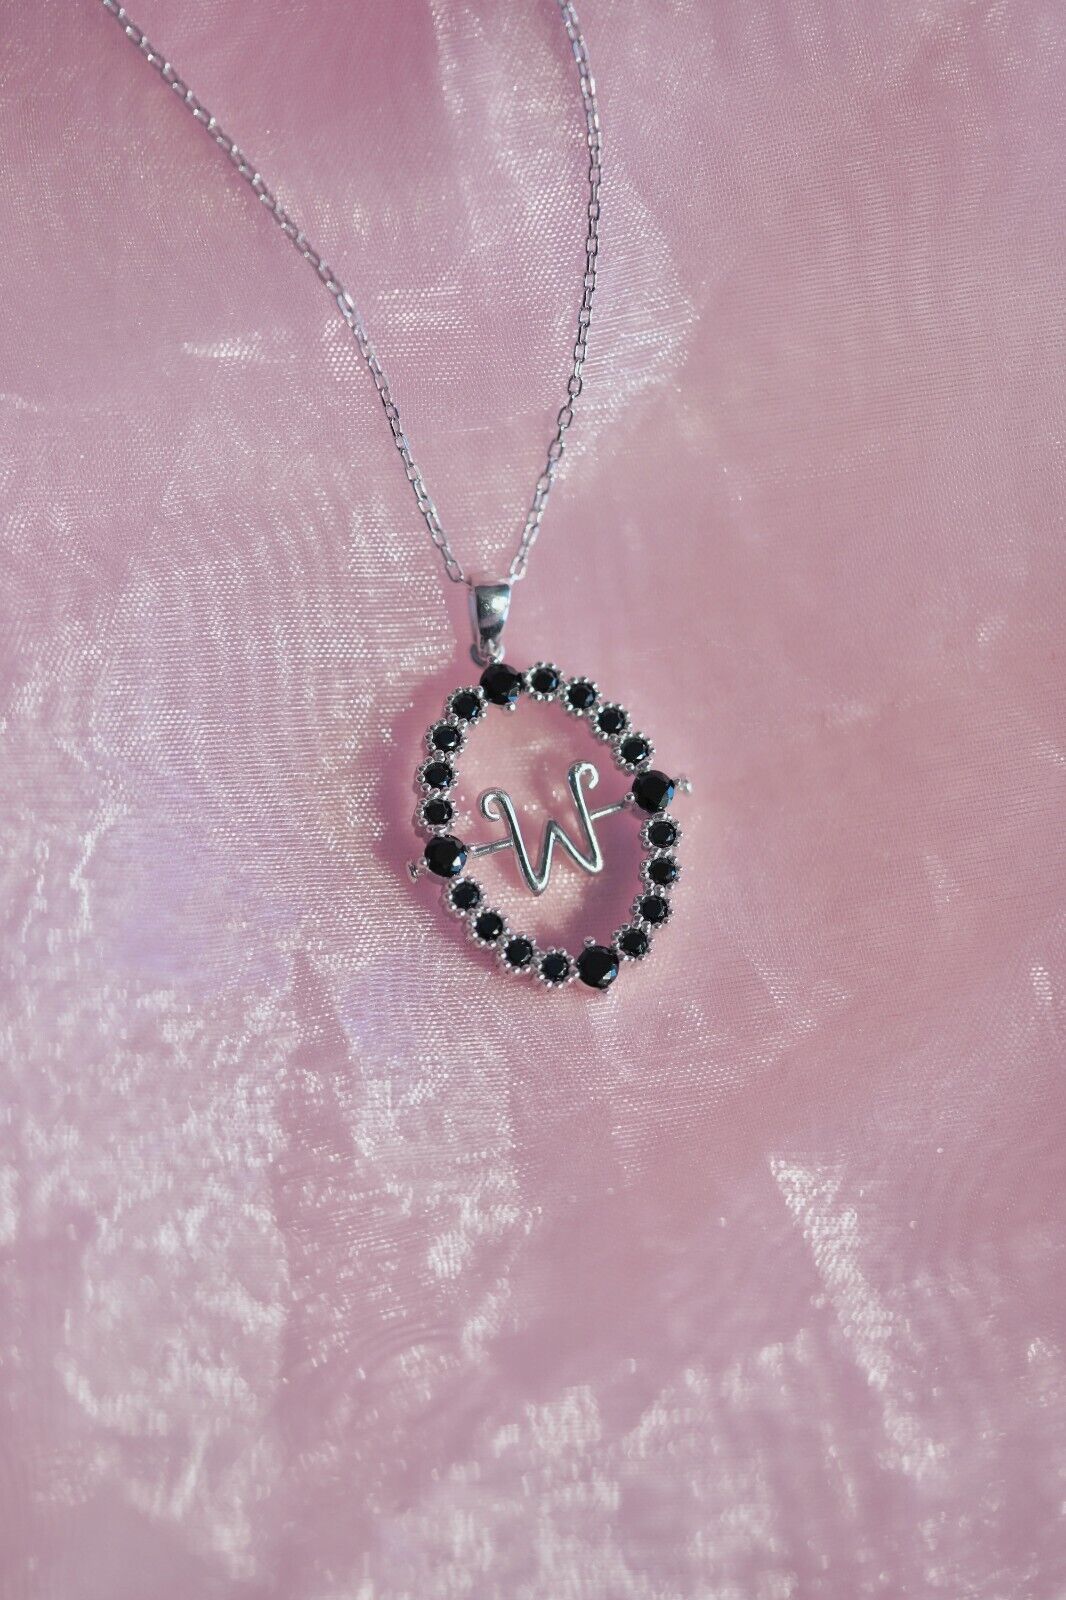 WEDNESDAY W NECKLACE-LETTER NECKLACE-ADAMS FAMILY-PERSONALIZED-Letter Necklace